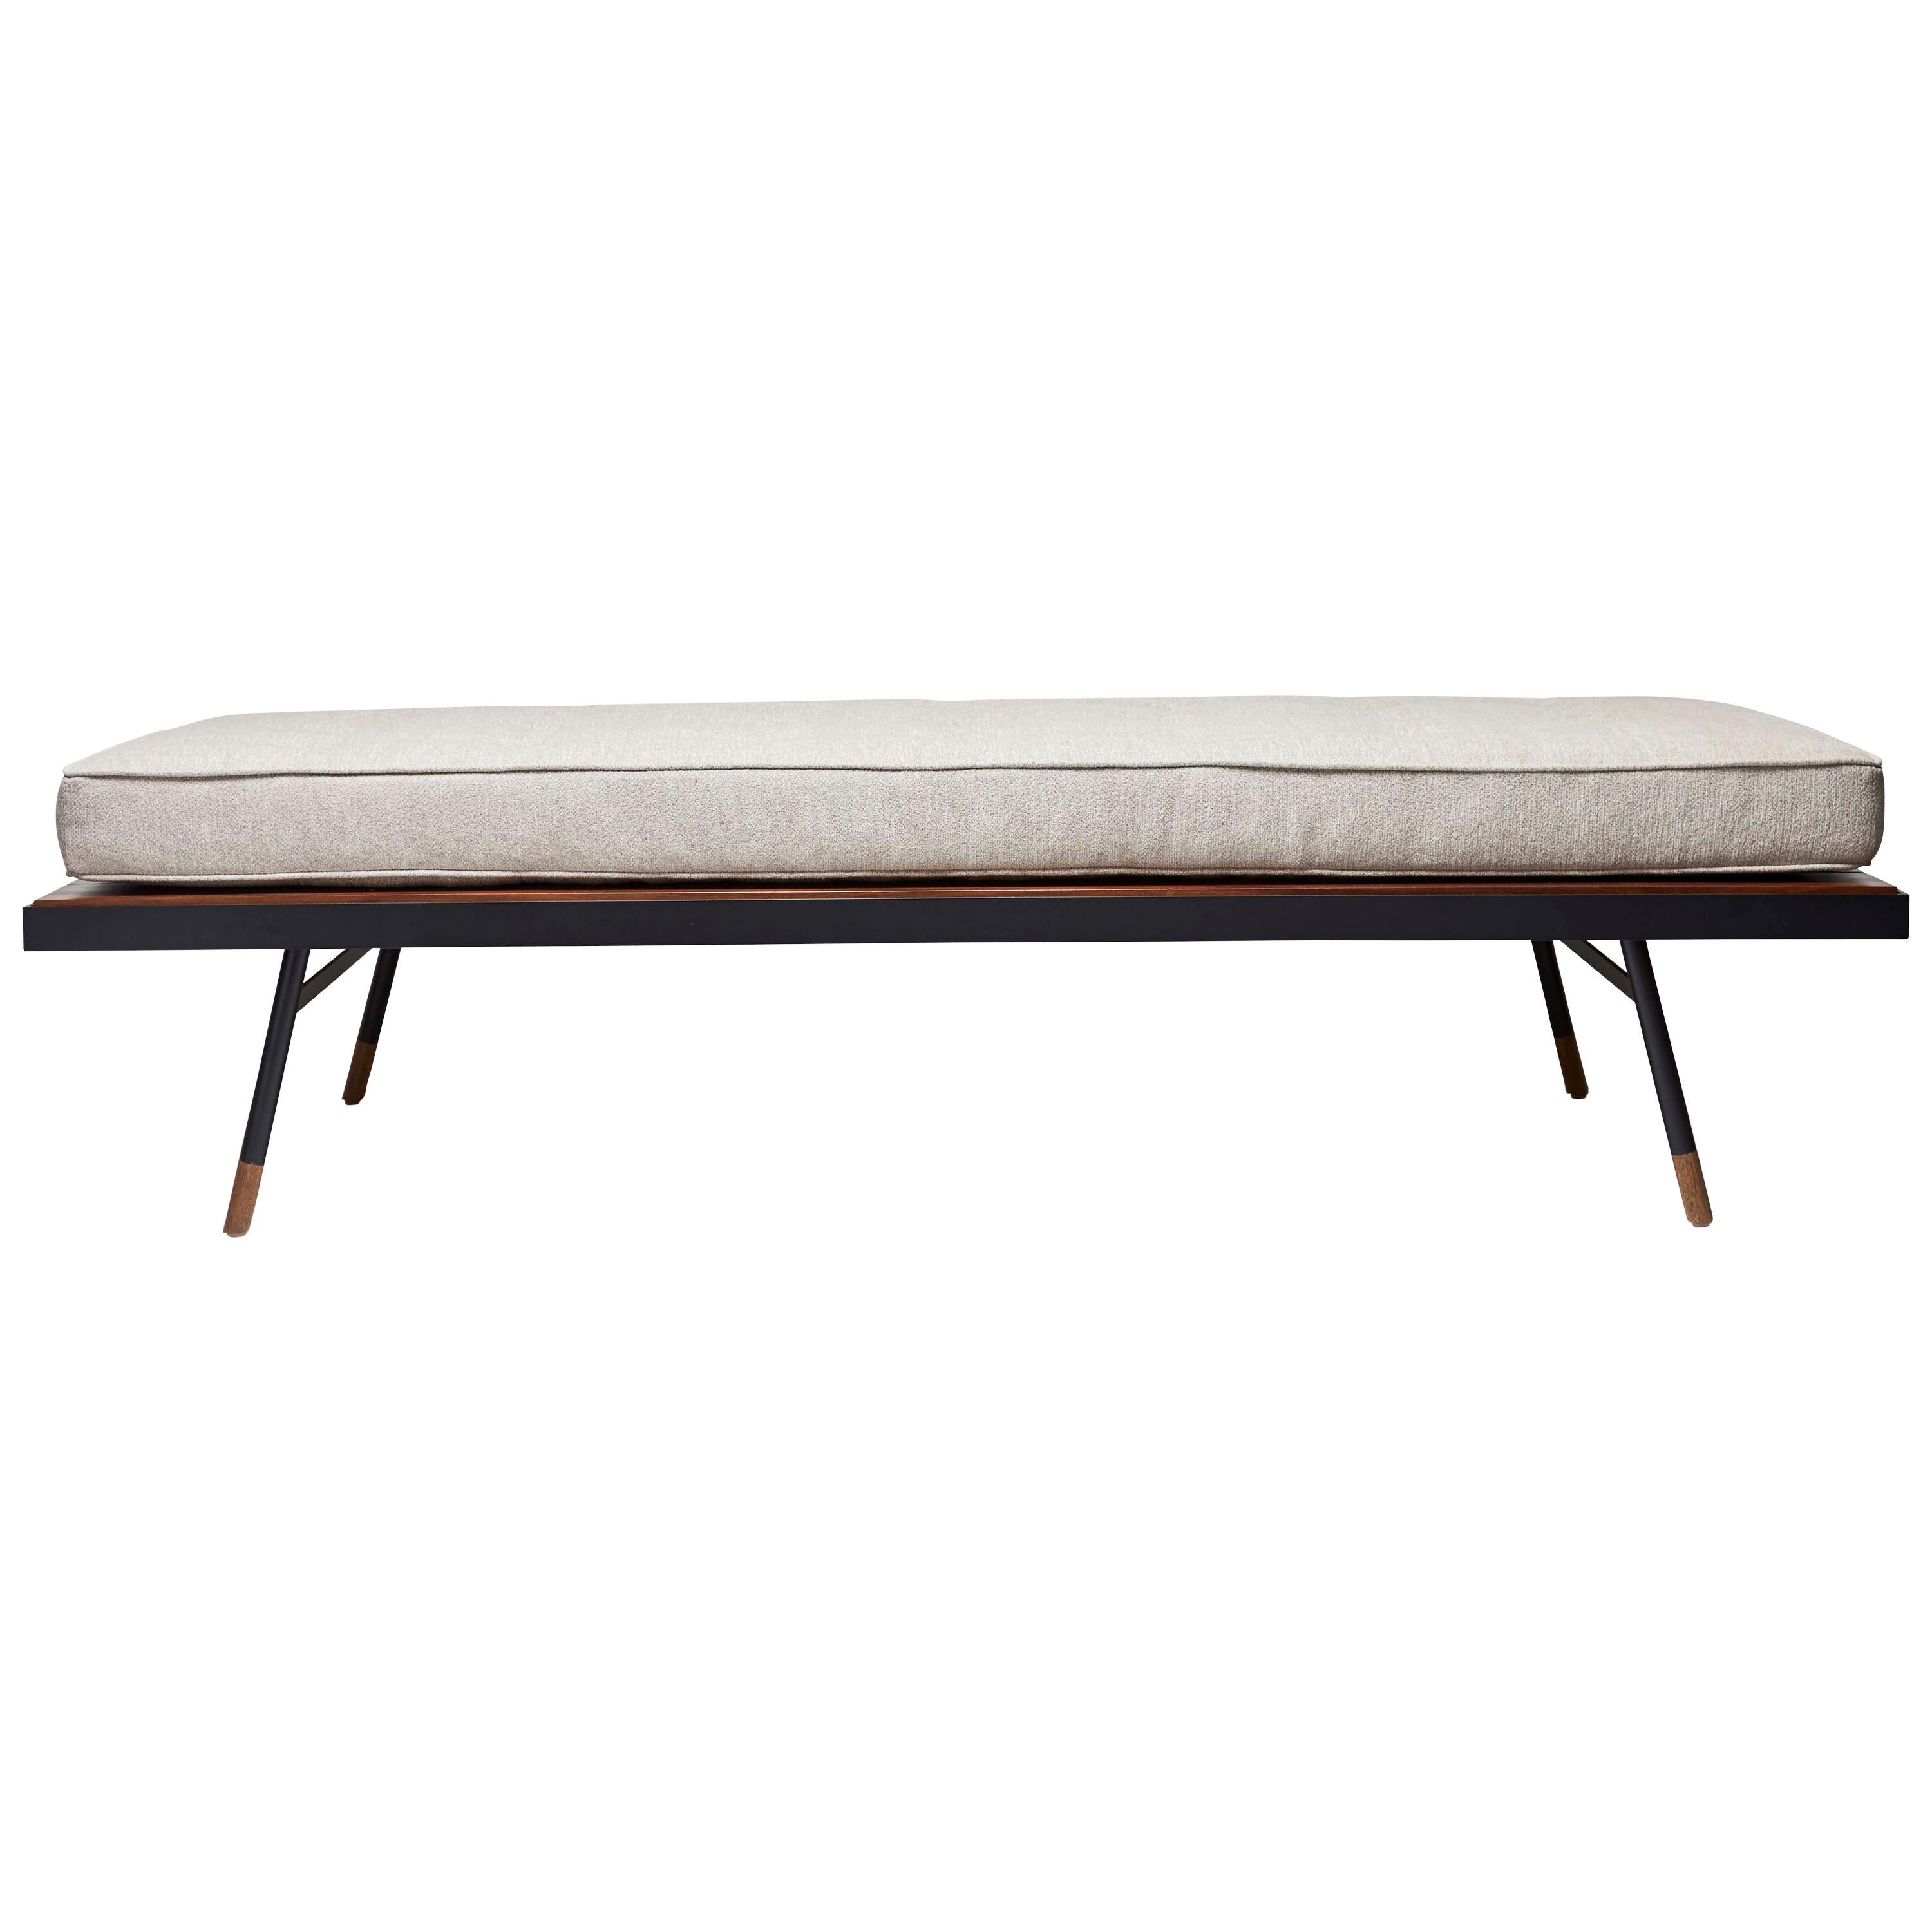 Indoor/Outdoor Montrose Daybed by Lawson-Fenning For Sale